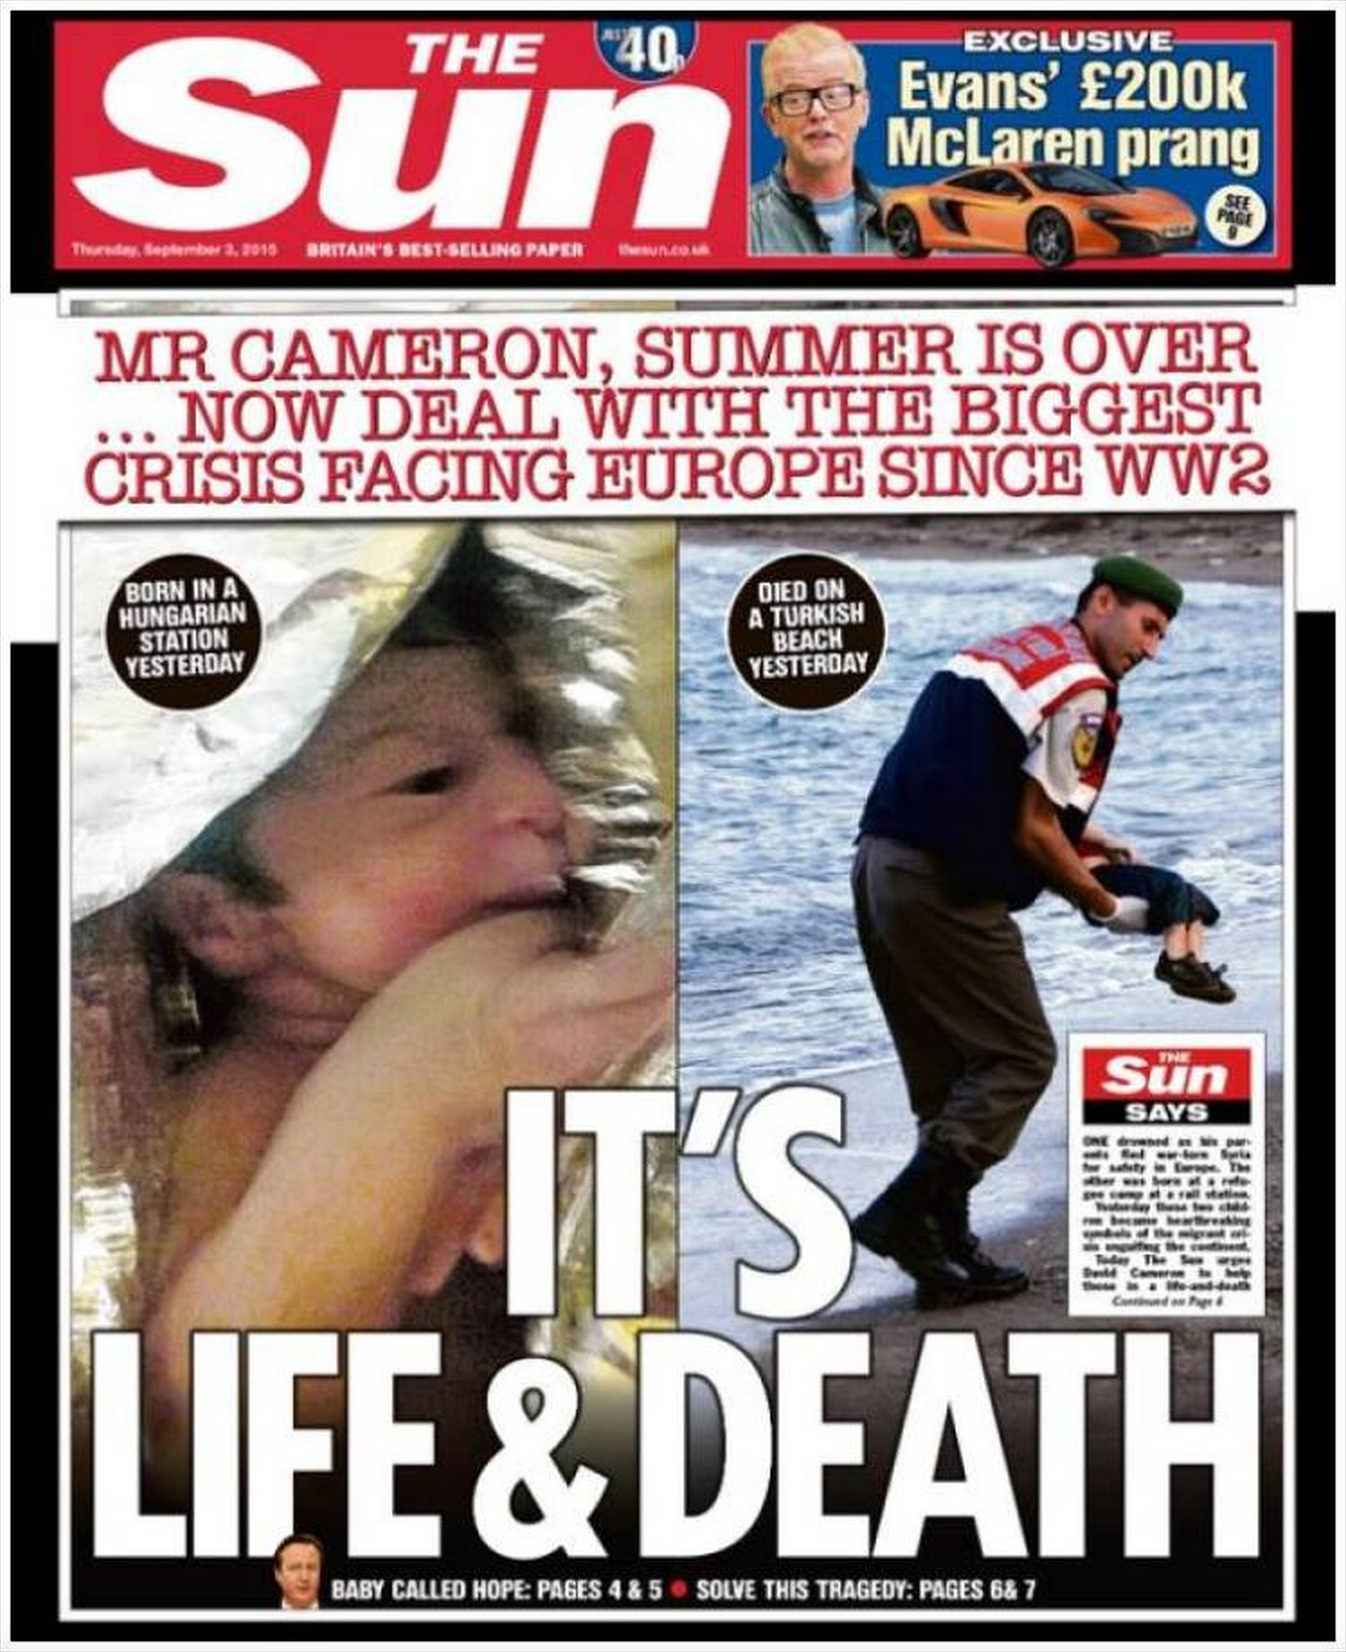 Drowned Migrant Boy The Sun front page